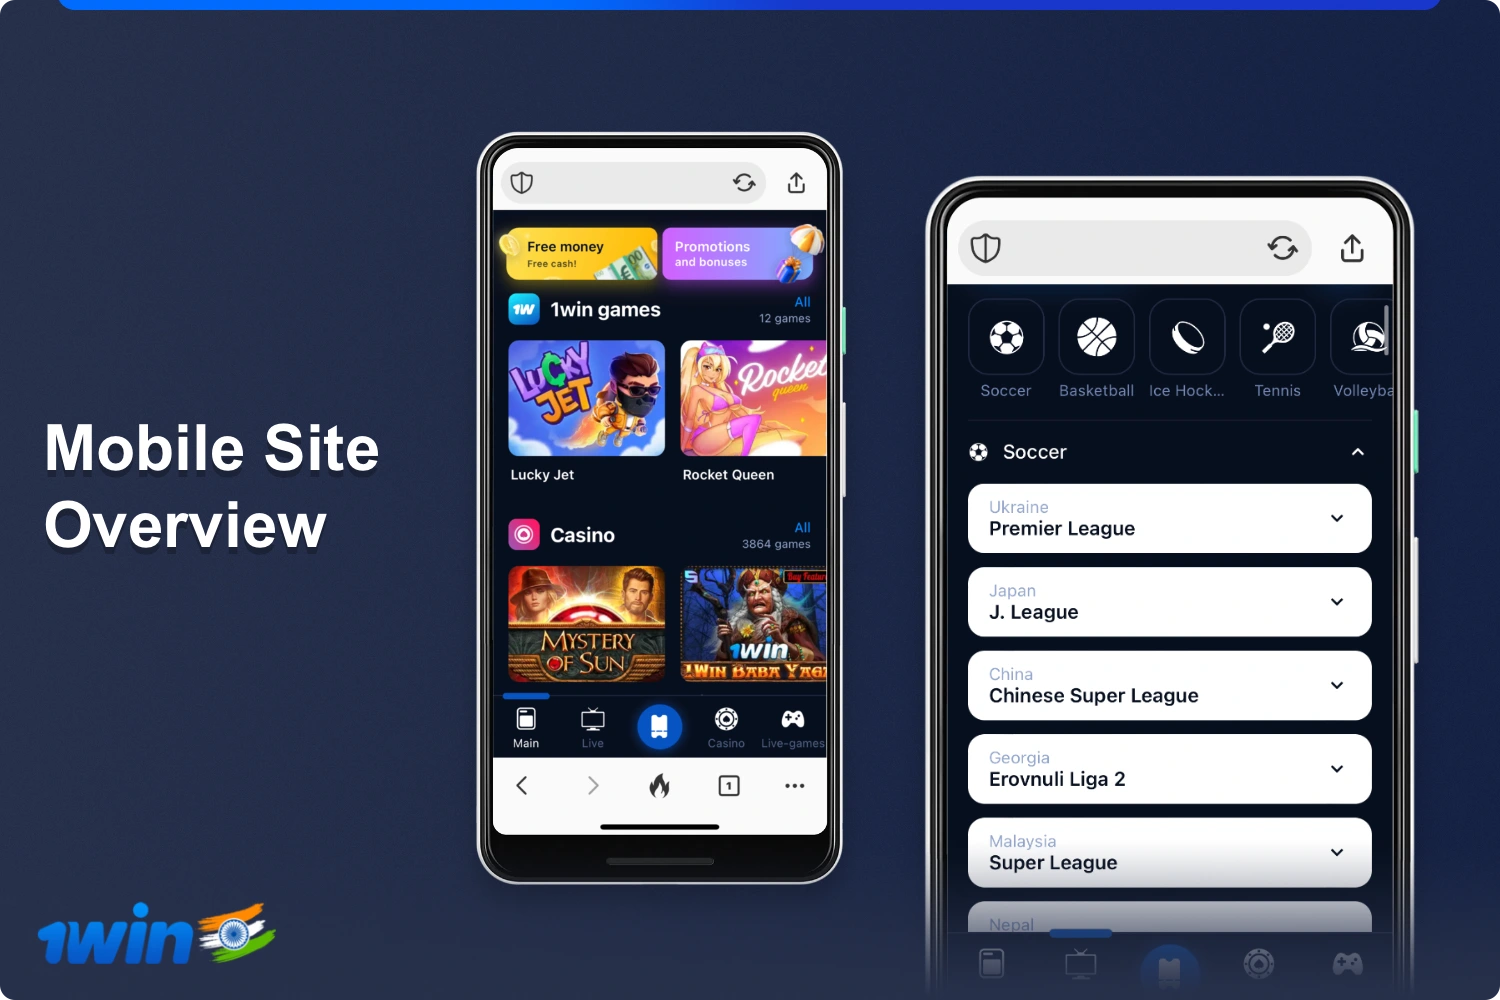 In addition to the app, 1win offers its customers in India a convenient mobile version of the site